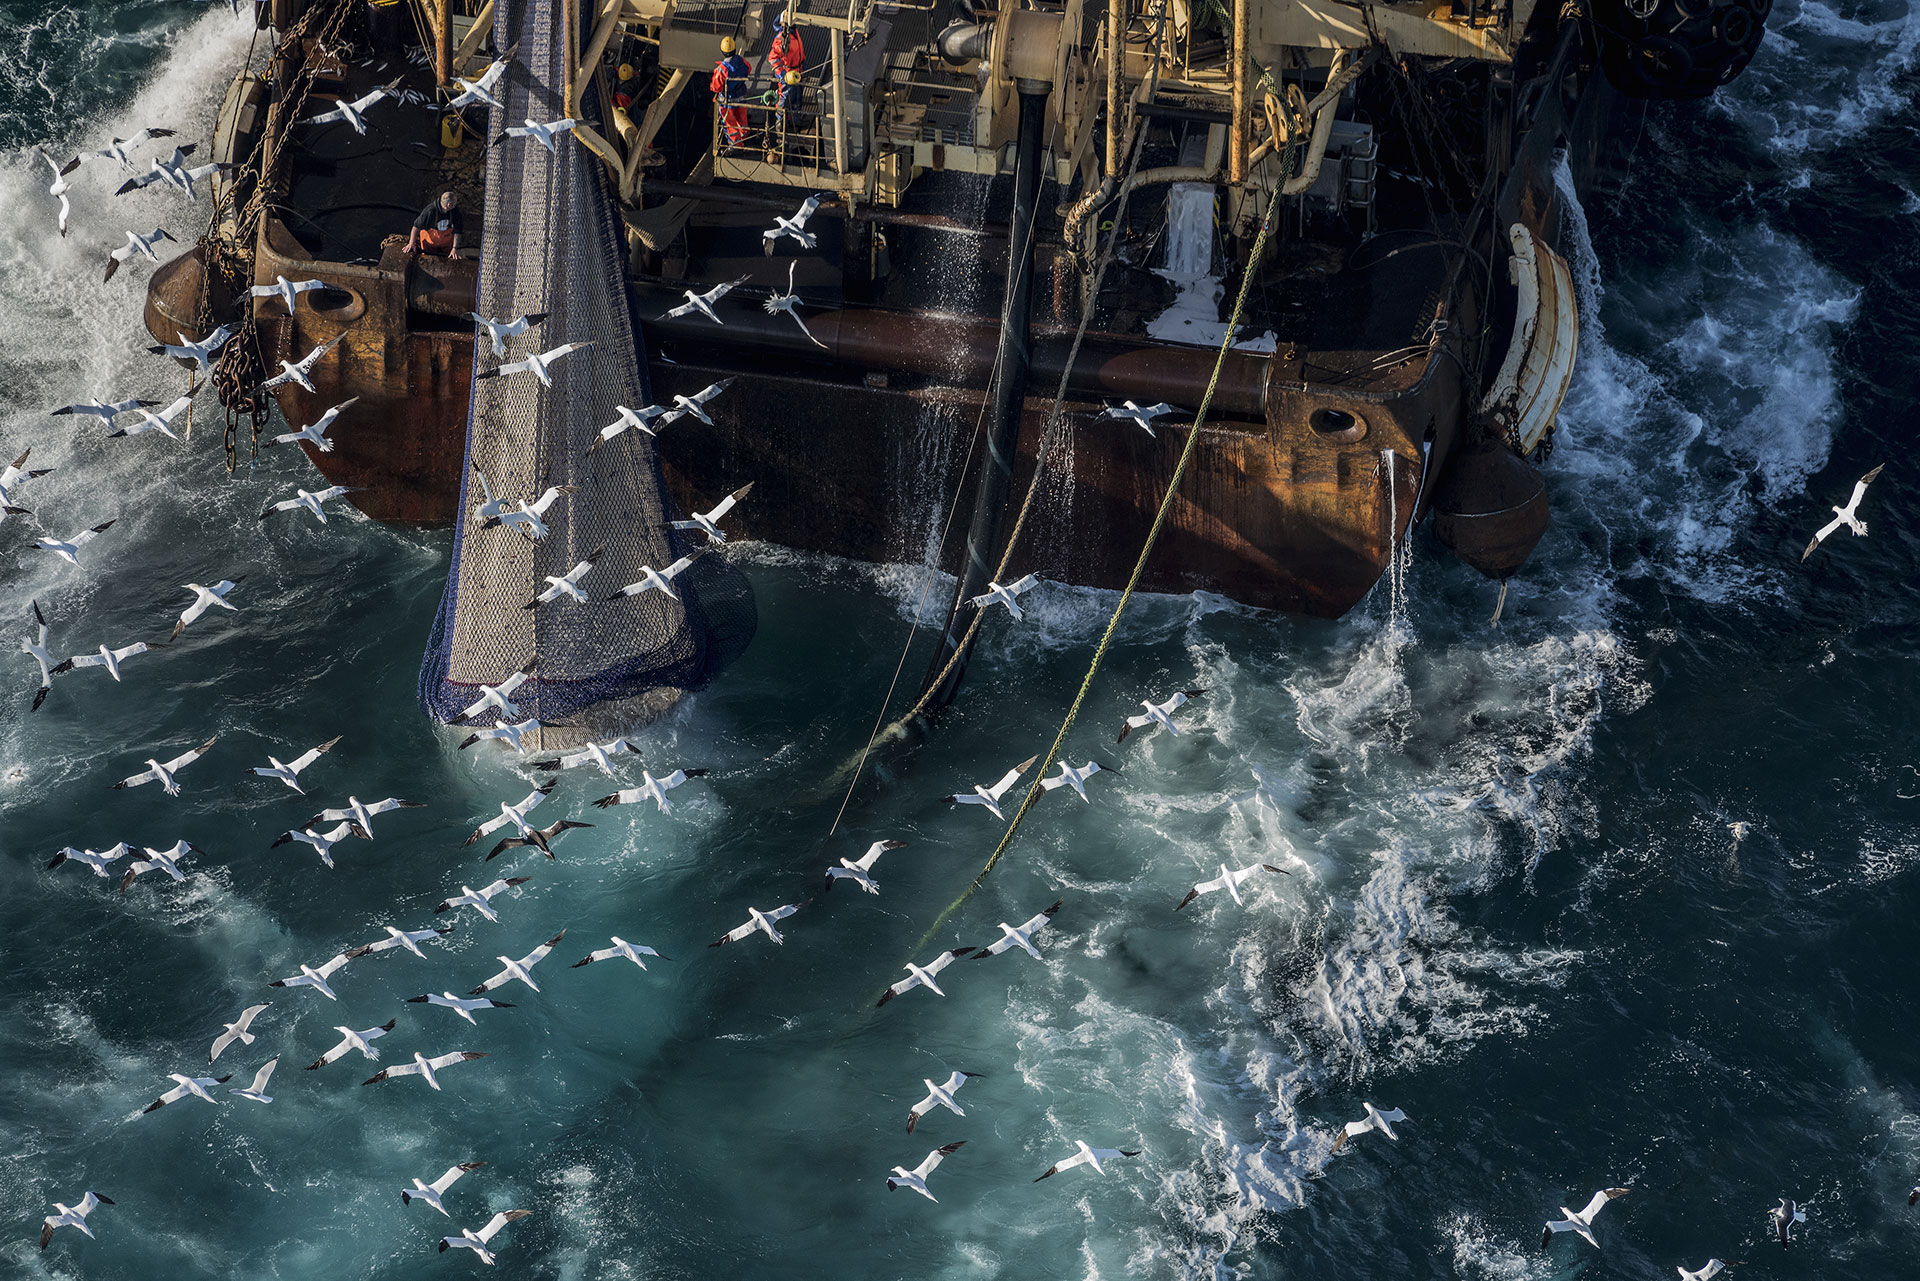 Fishing Activities in the English Channel © Christian Åslund / Greenpeace